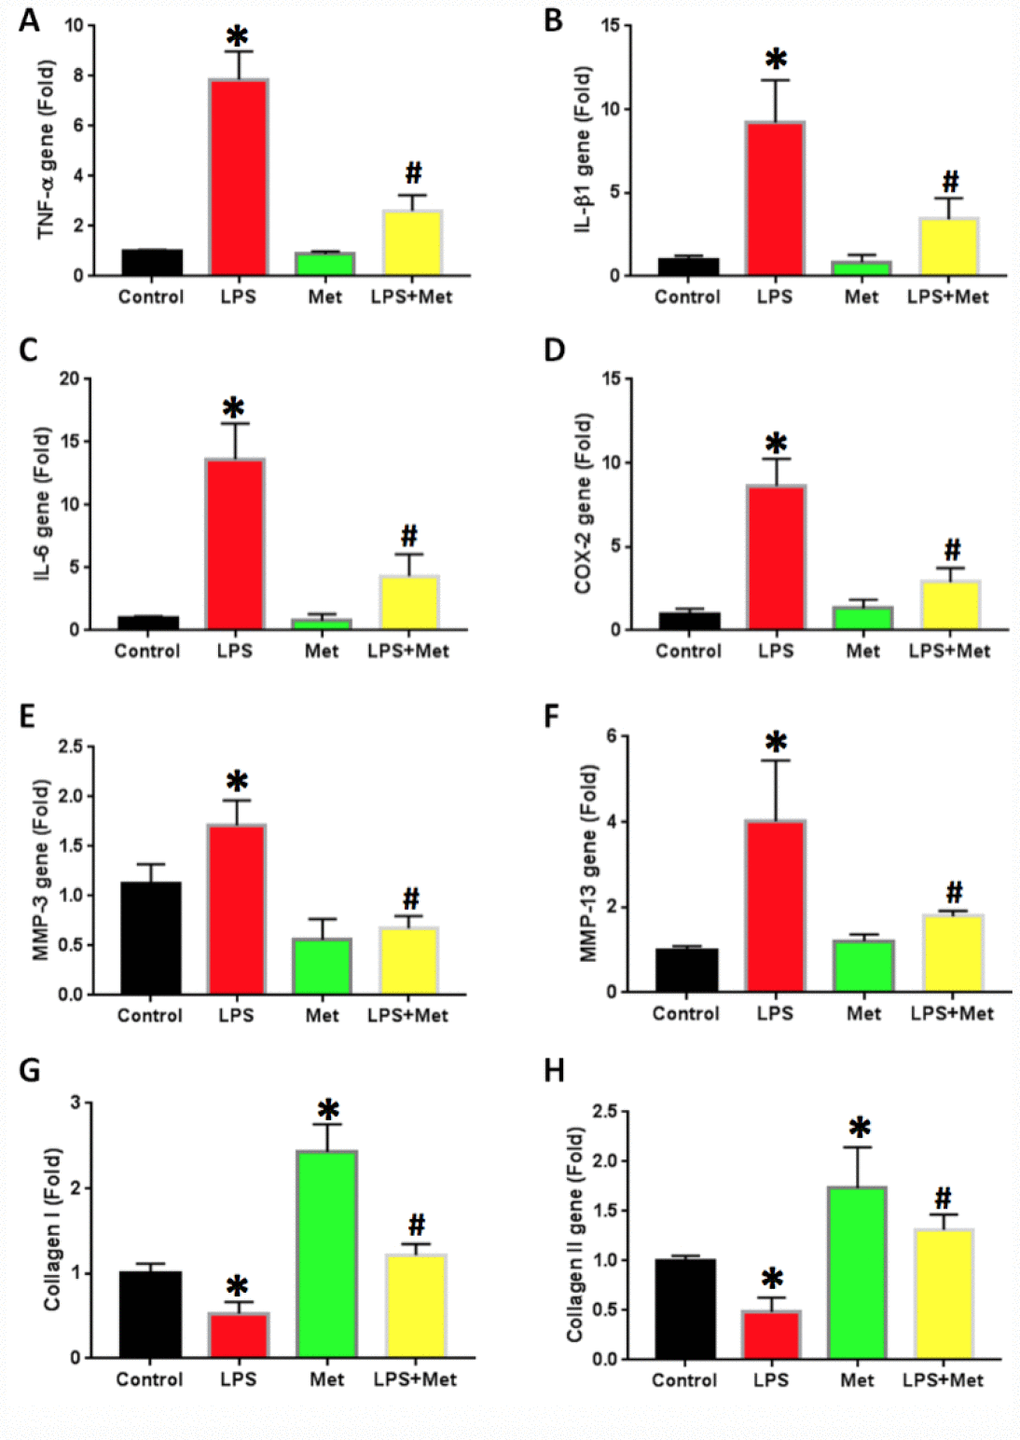 Metformin inhibited the inflammatory gene expression in rabbit AF cells induced by LPS. (A) TNF-a gene expression. (B) IL-b1 gene expression. (C) COX-2 gene expression. (D) IL-6 gene expression. (E) MMP-3 gene expression. (F) MMP-13 gene expression. (G) Collagen I gene expression. (H) Collagen II gene expression. LPS increased the expression of all tested inflammatory-related genes and MMPs, but decreased the levels of collagen type I and type II. The LPS effect was inhibited by metformin. *p#p